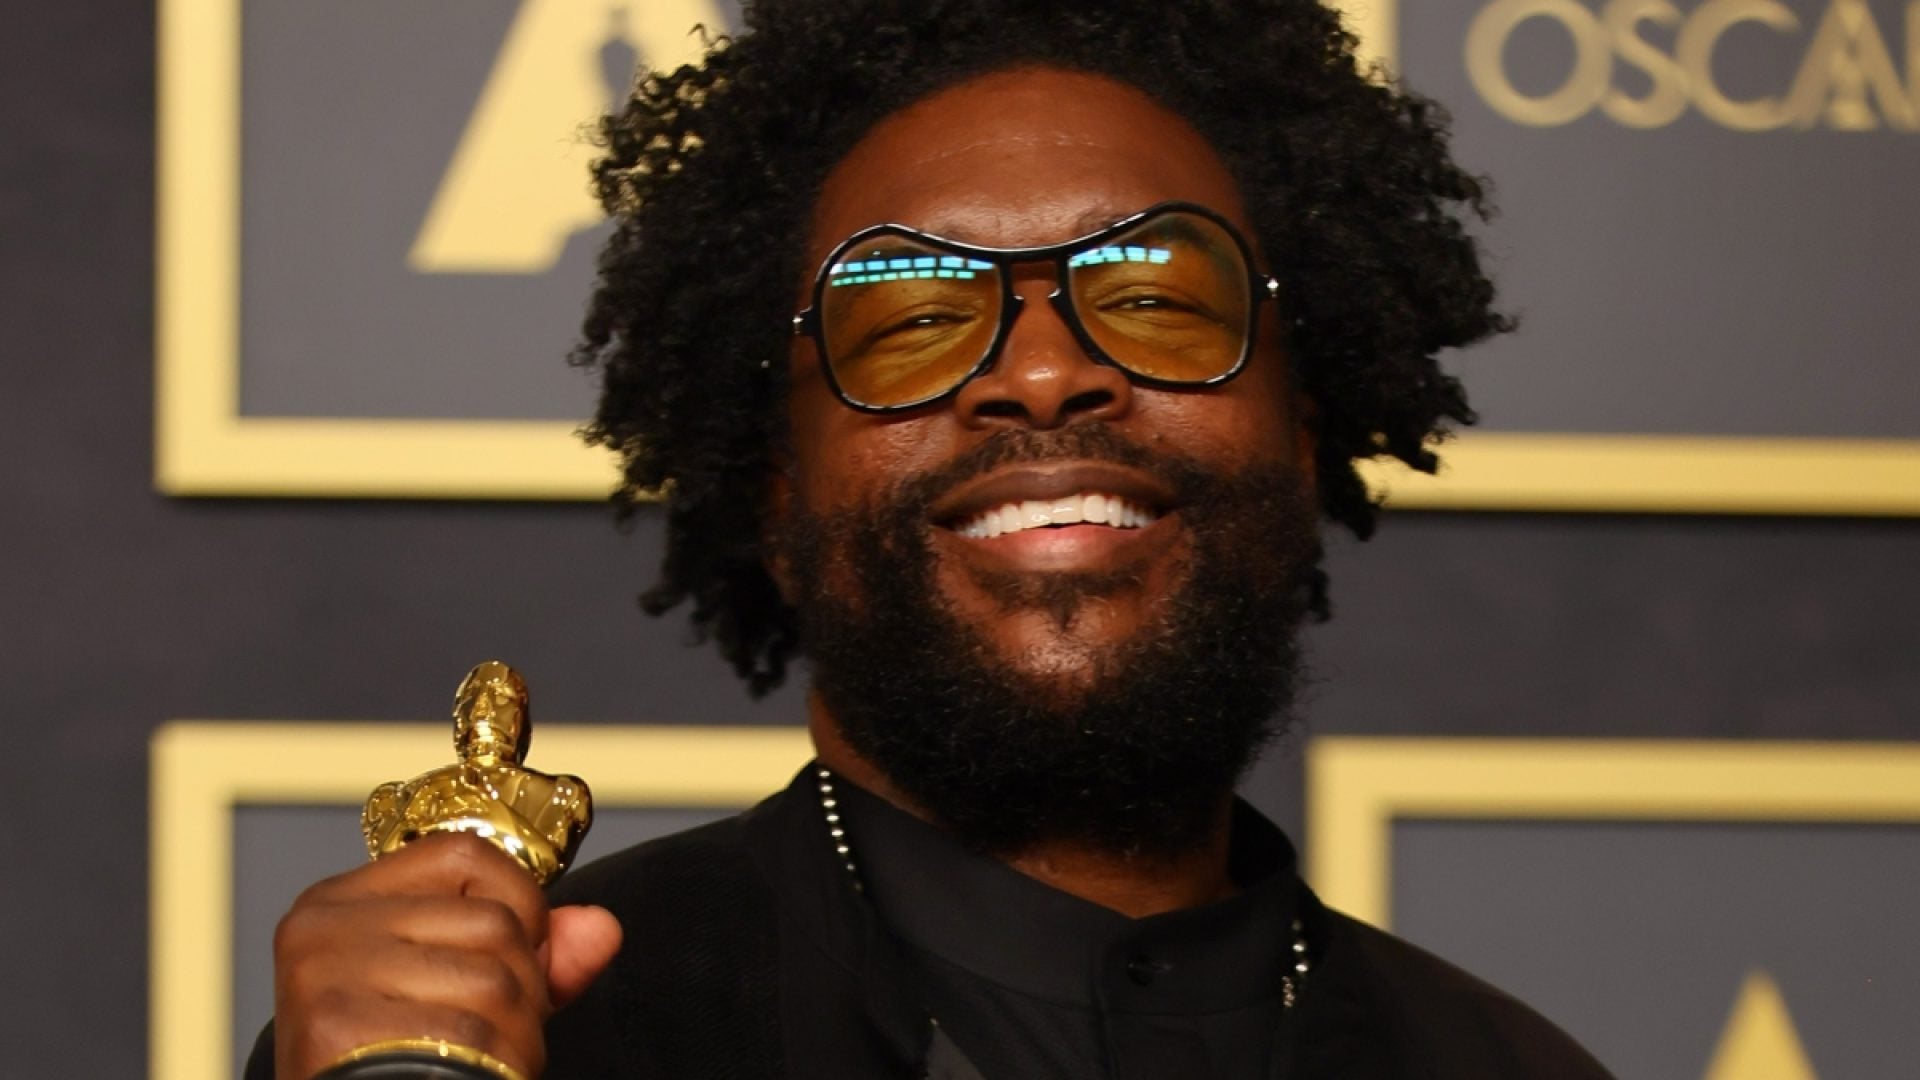 Questlove's Message To Black People: 'We Don't Take Time To Dream Enough'